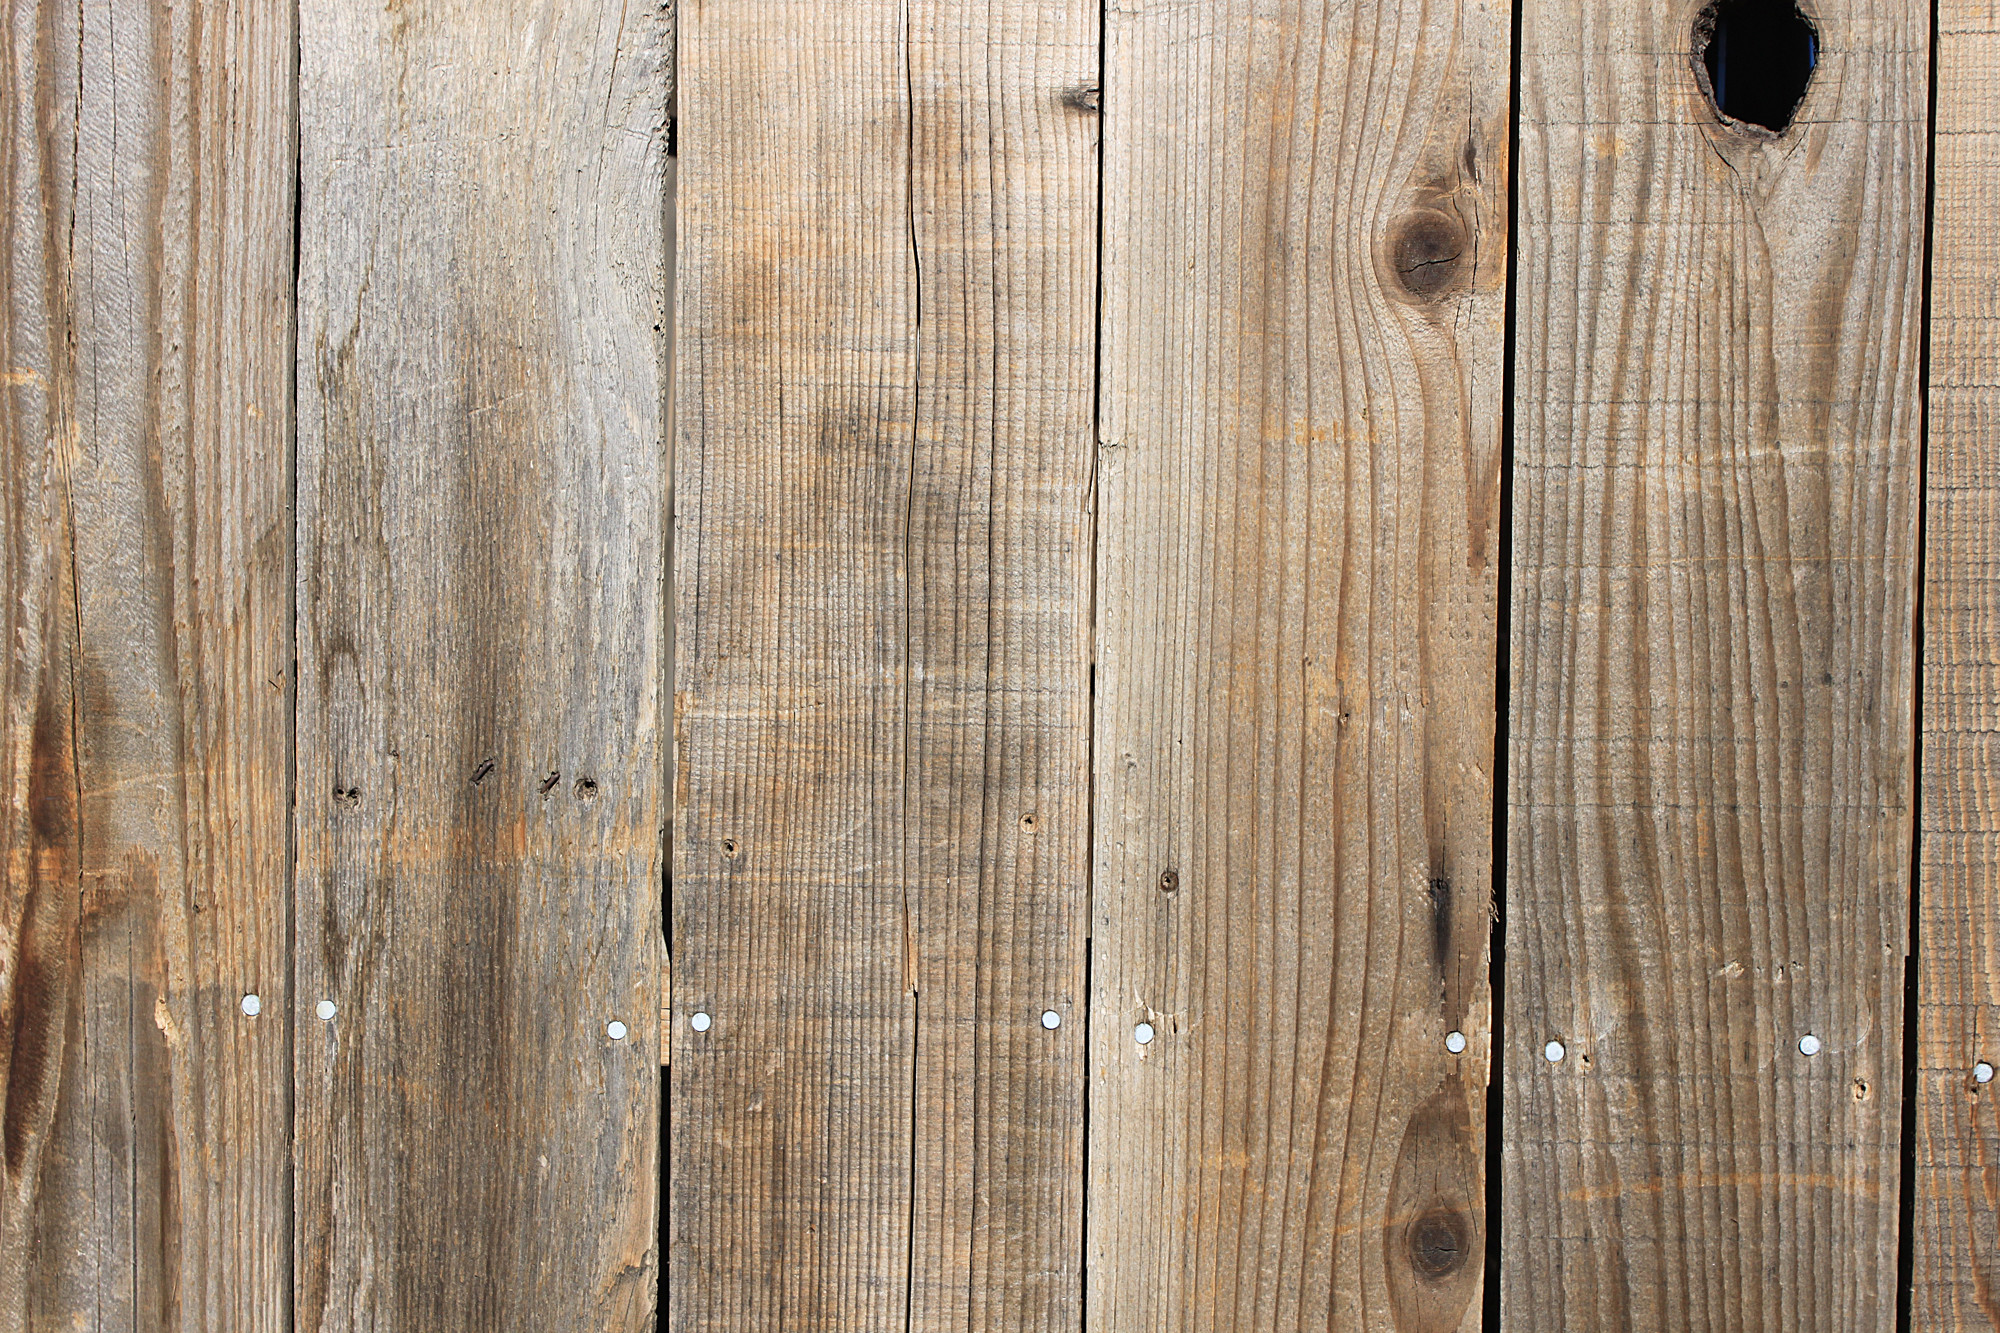 2000x1333 Rustic Wood Background Related Keywords & Suggestions Rustic Wood #9638